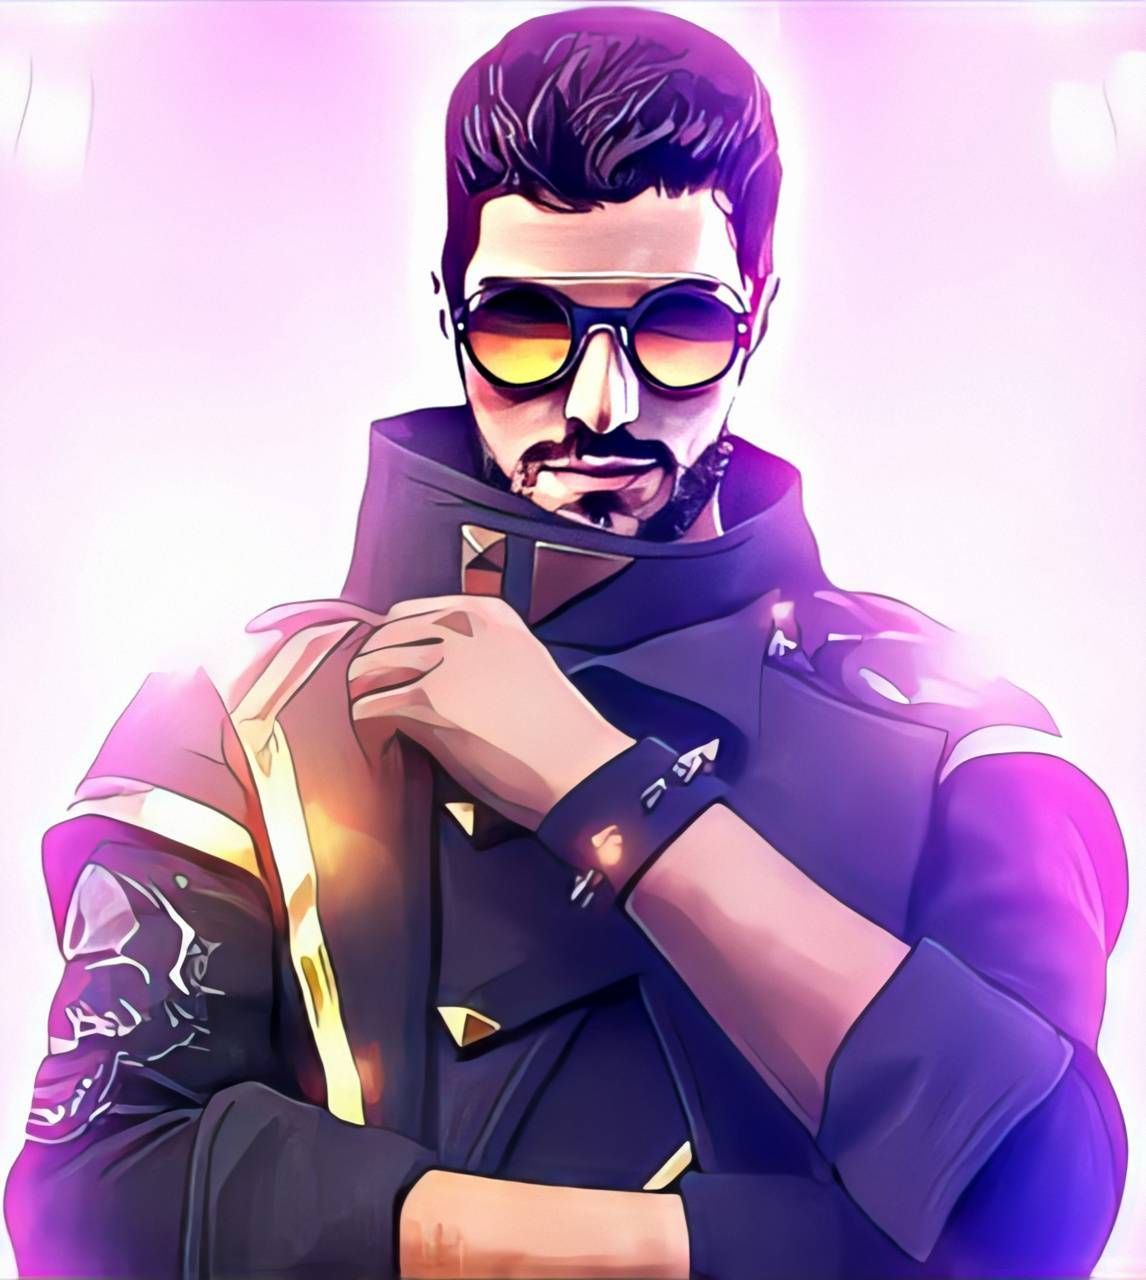 Download Dj alok free fire wallpaper by F4ISK4 now. Browse. Download cute wallpaper, Animated wallpaper for mobile, Cute couple wallpaper